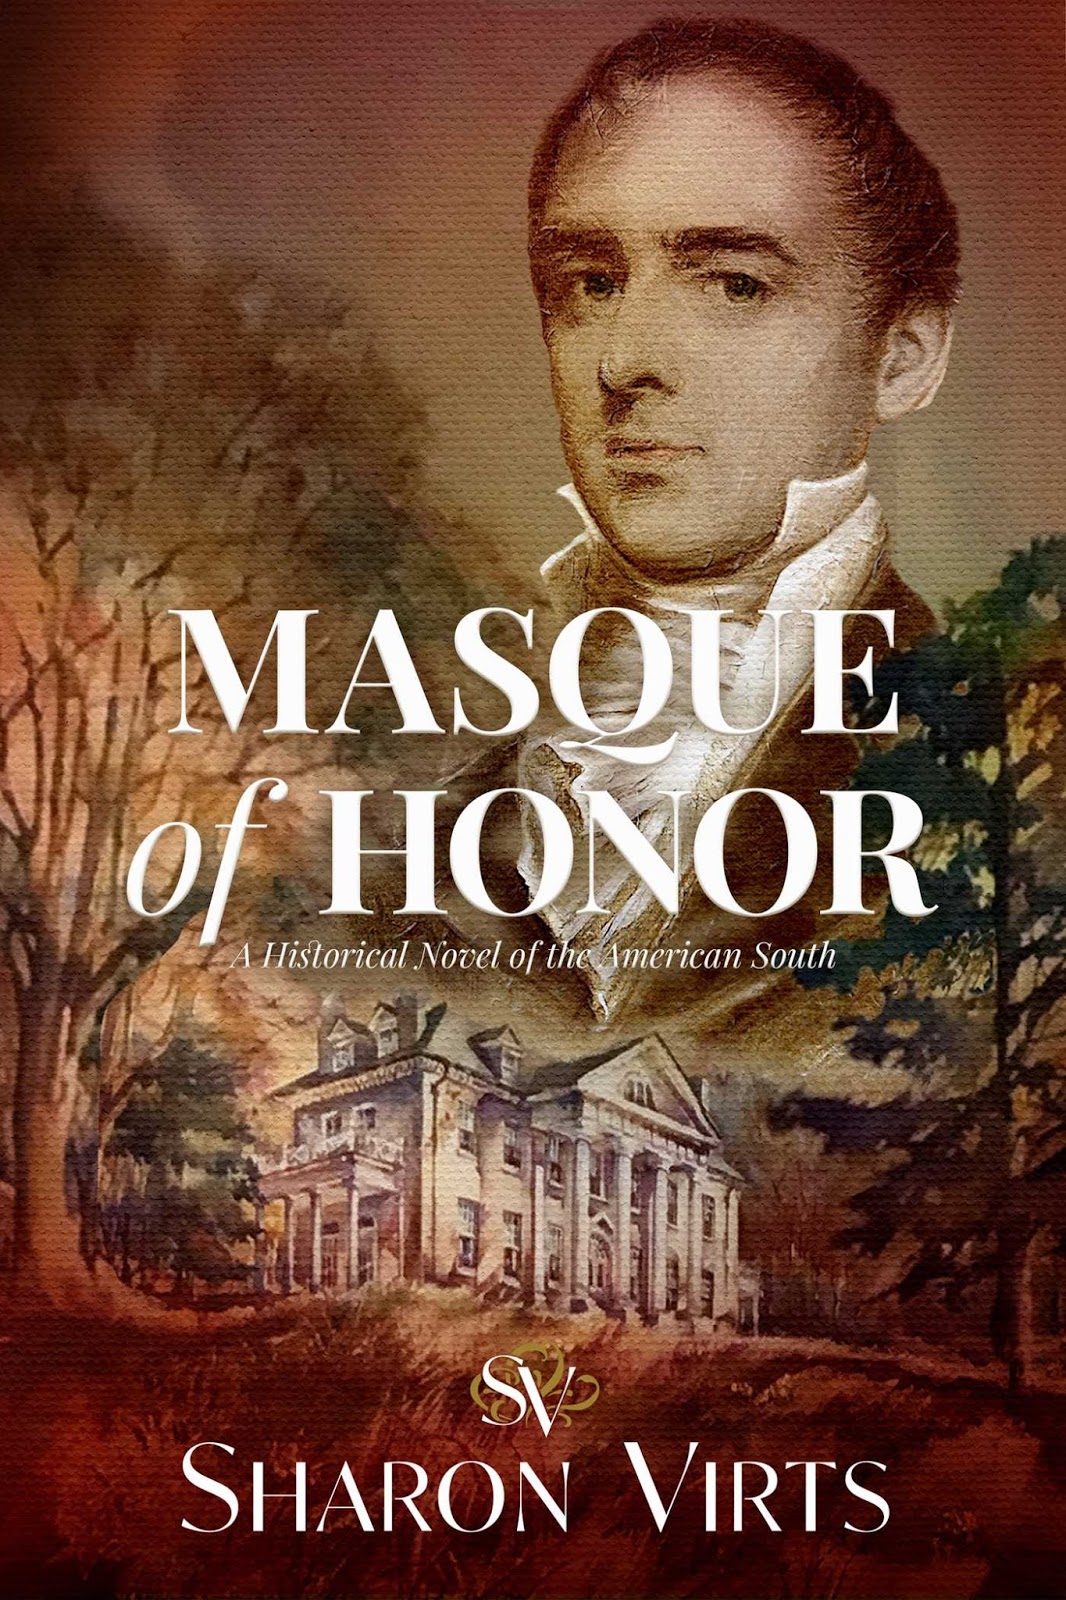 Book Spotlight: Masque of Honor by Sharon Virts